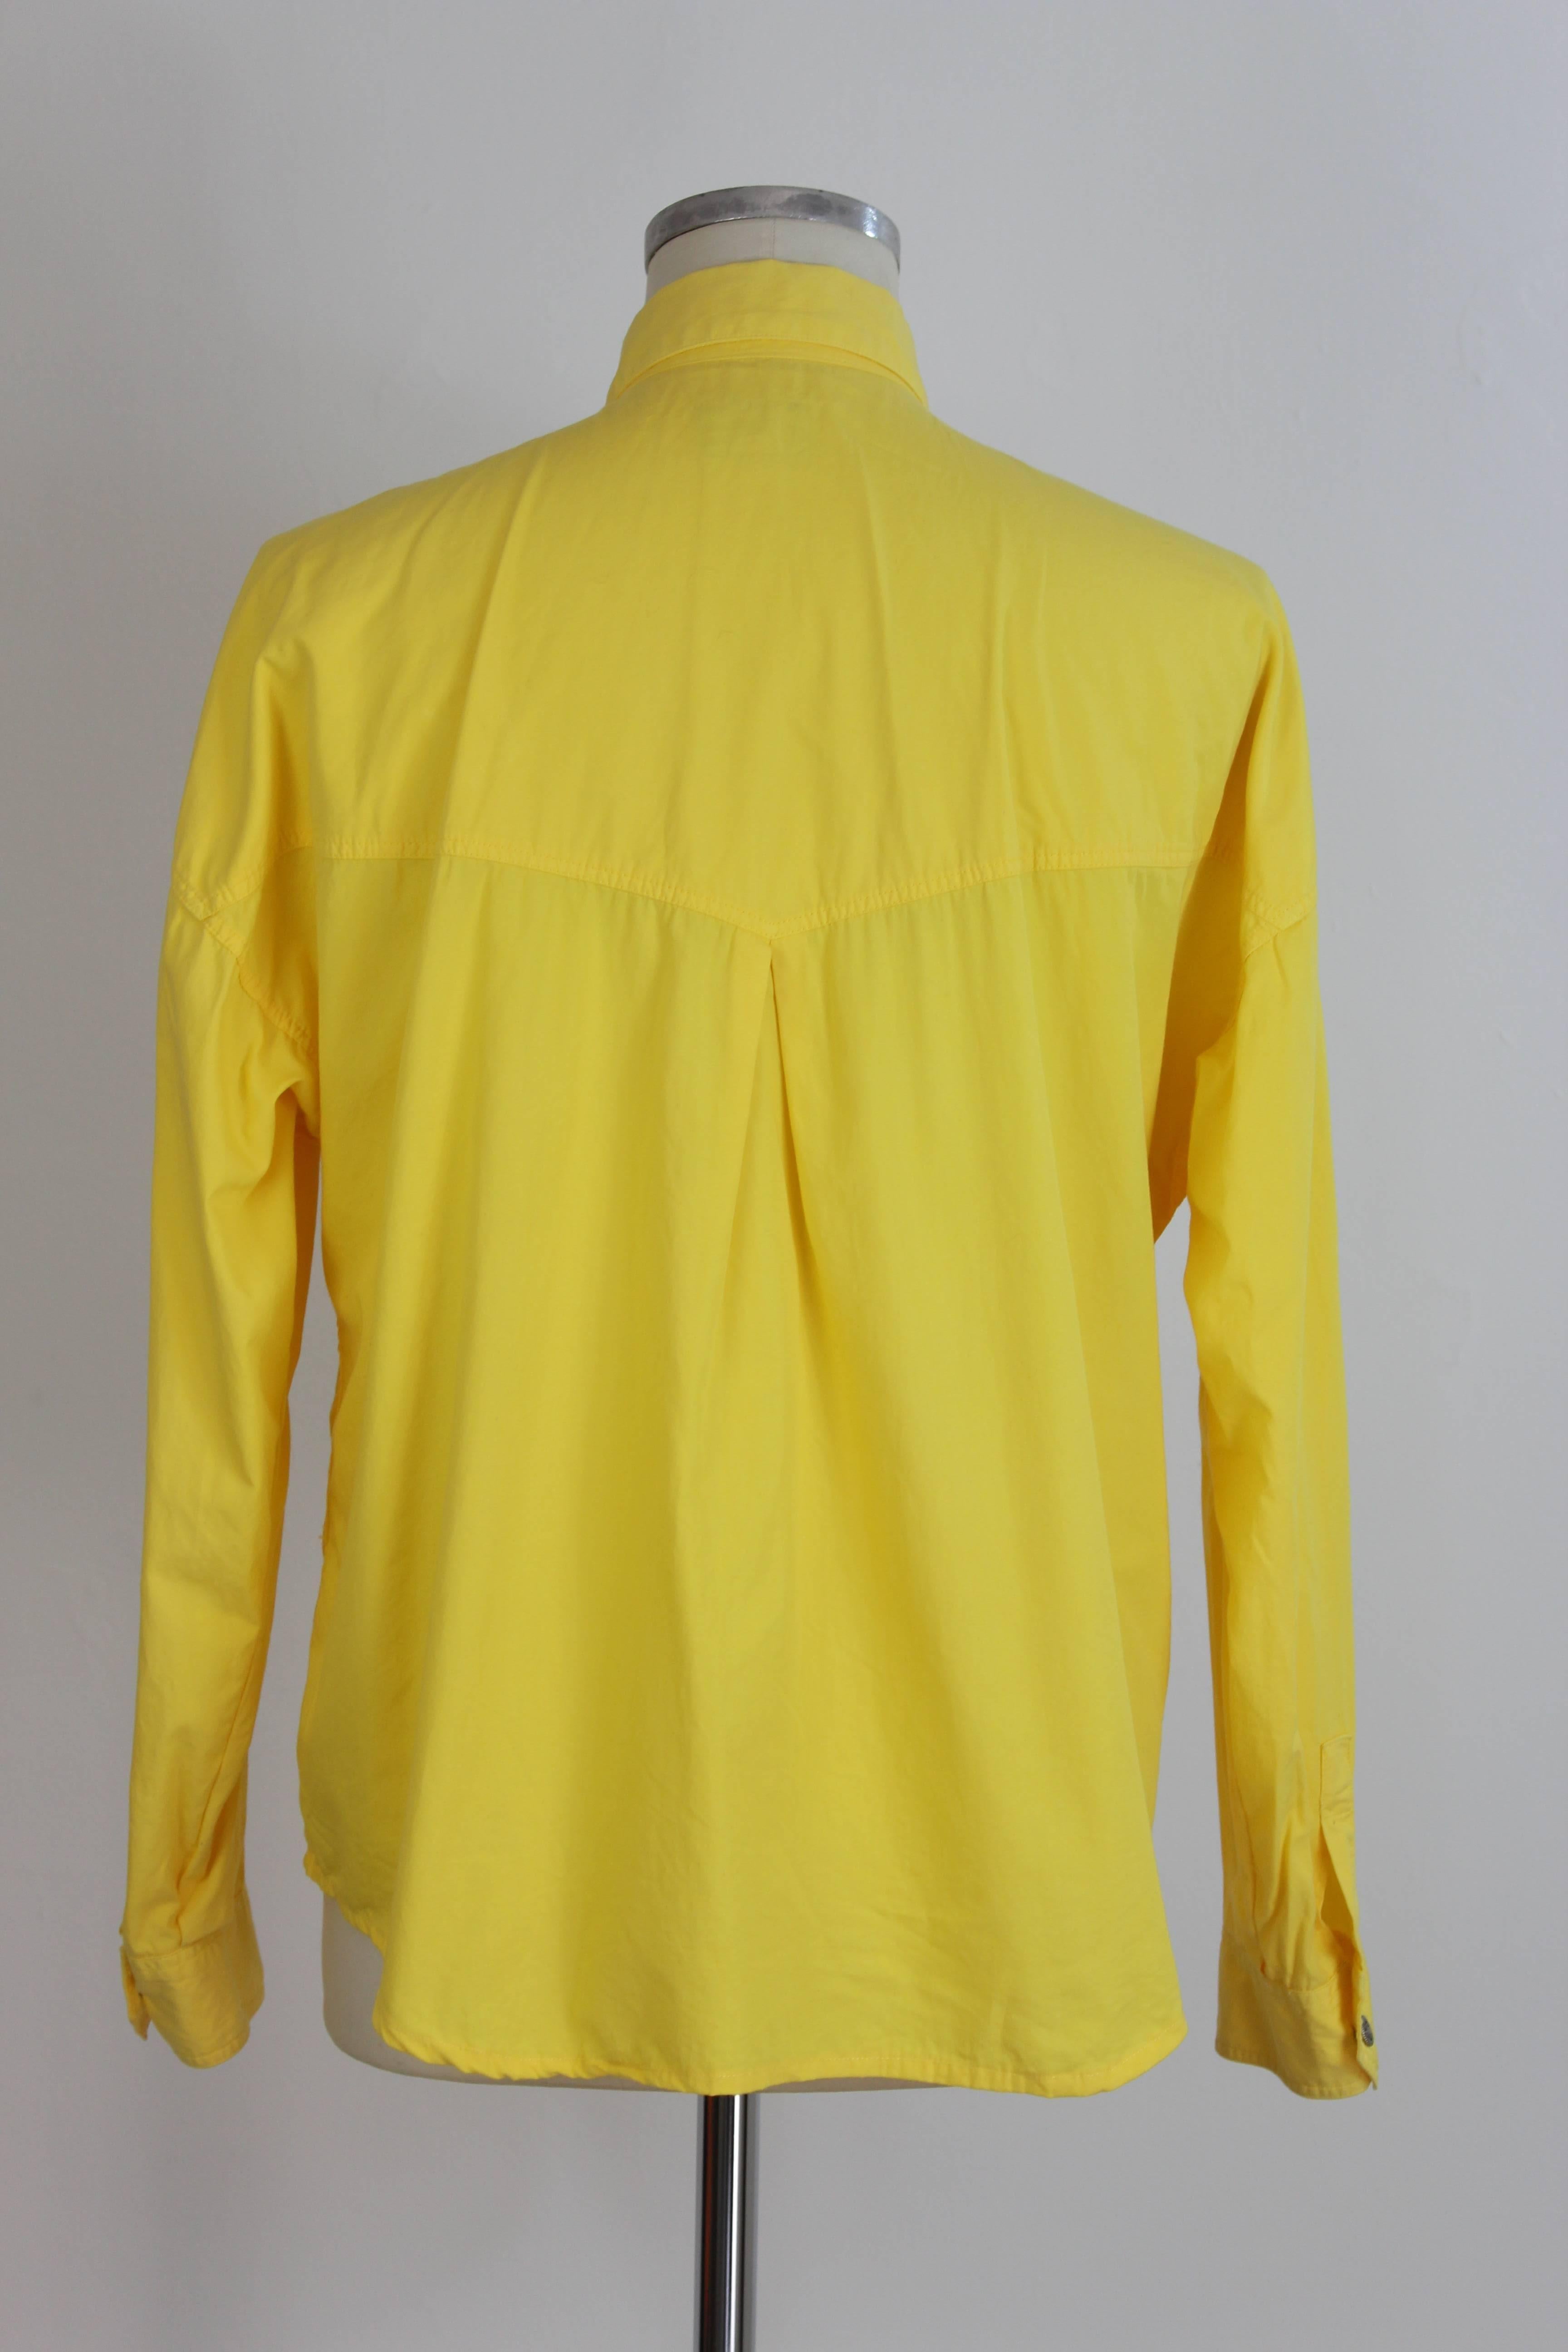 Gianni Versace Jeans Couture vintage shirt, cowboy model. It is yellow 100% cotton. The buttons are all branded with the classic jellyfish. Fresh and soft fabric, made in Italy. Excellent vintage condition.

Size L

Shoulders: 58 cm
Chest / bust: 58